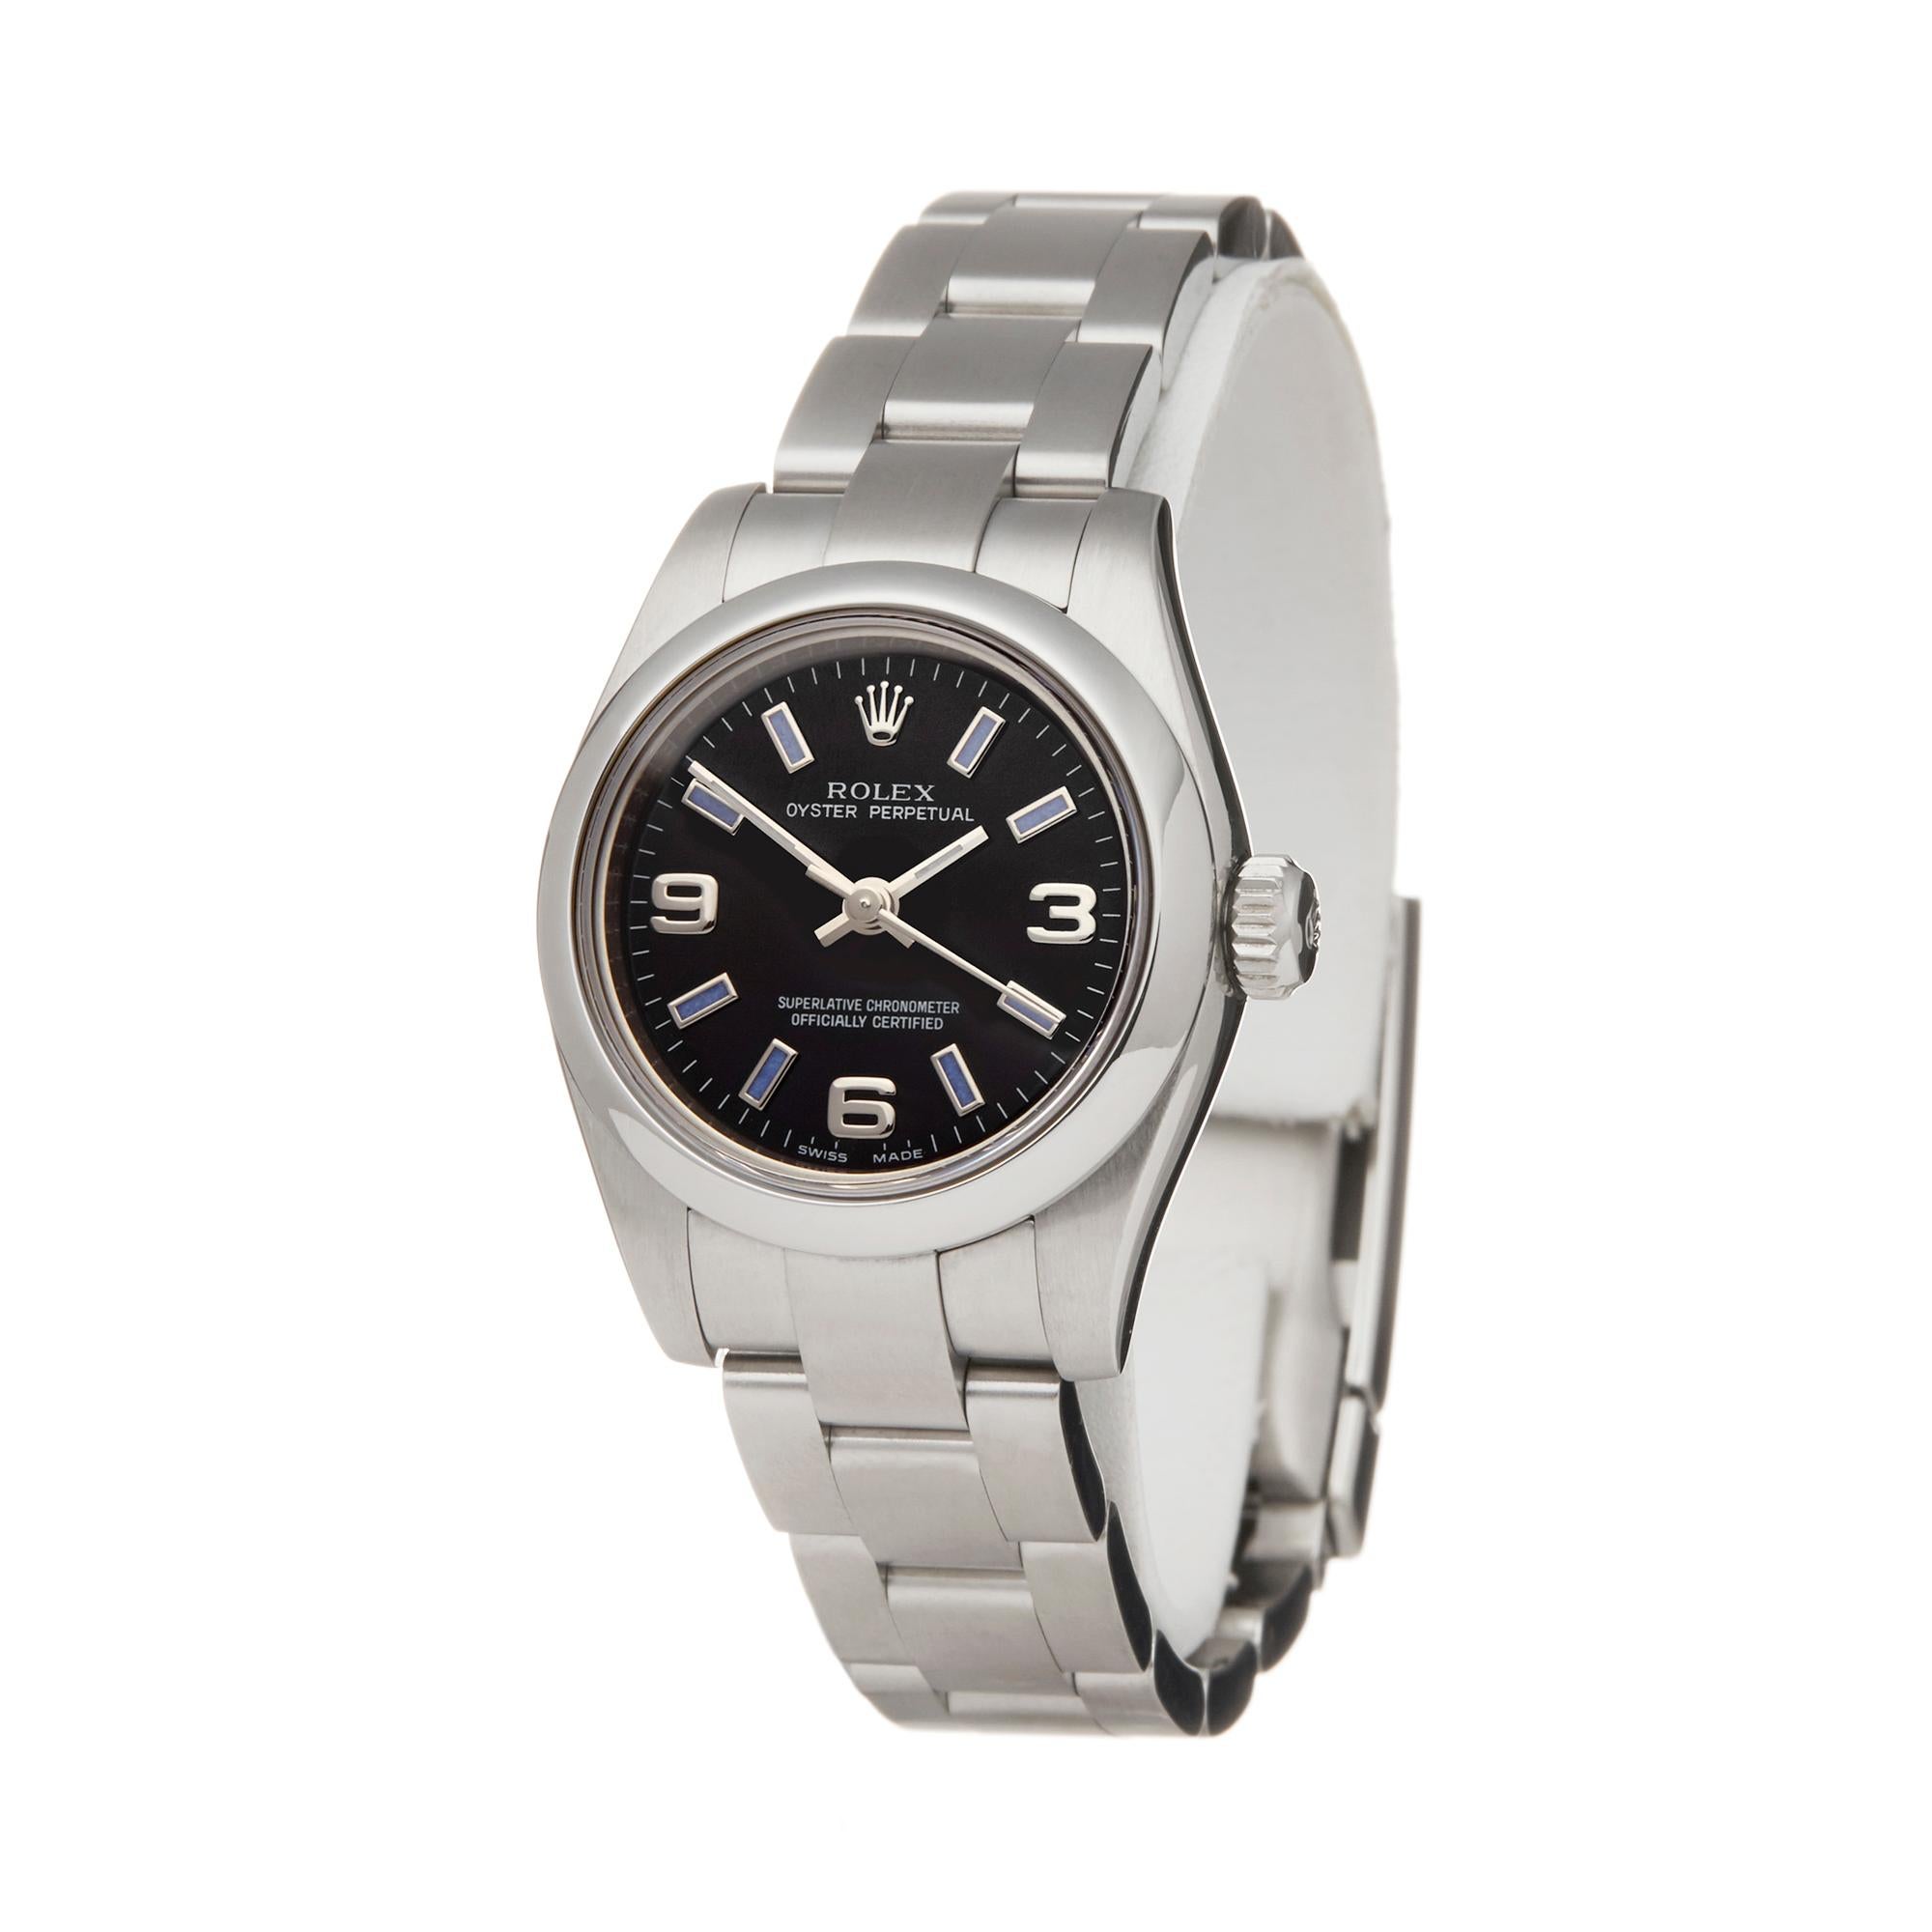 Reference: W5782
Manufacturer: Rolex
Model: Oyster Perpetual
Model Reference: 176200
Age: 16th April 2013
Gender: Women's
Box and Papers: Box and Guarantee Only
Dial: Black Arabic
Glass: Sapphire Crystal
Movement: Automatic
Water Resistance: To